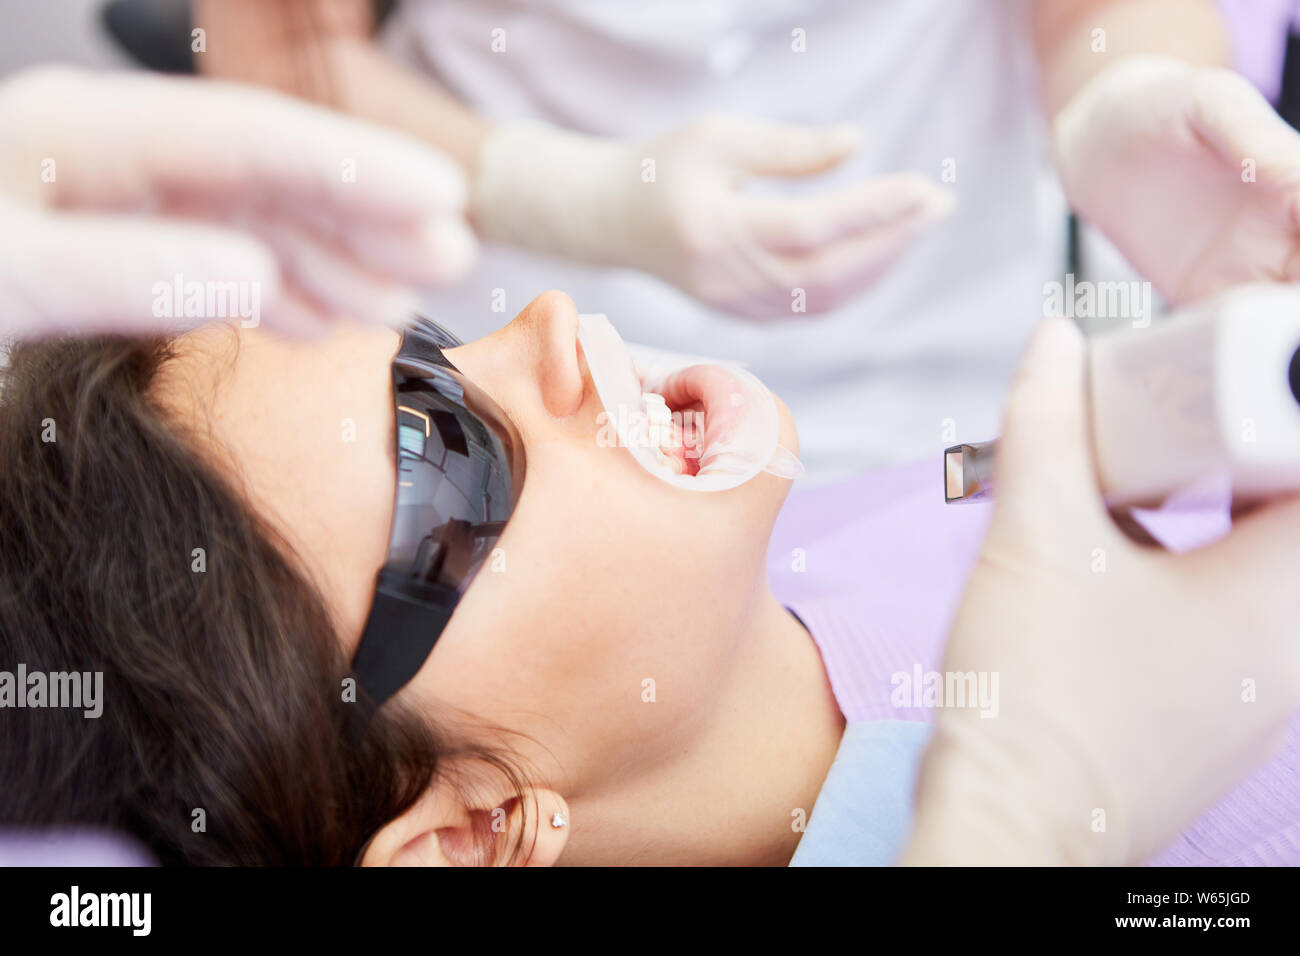 Patient with protective mask on her mouth at the dentist's for professional teeth whitening Stock Photo